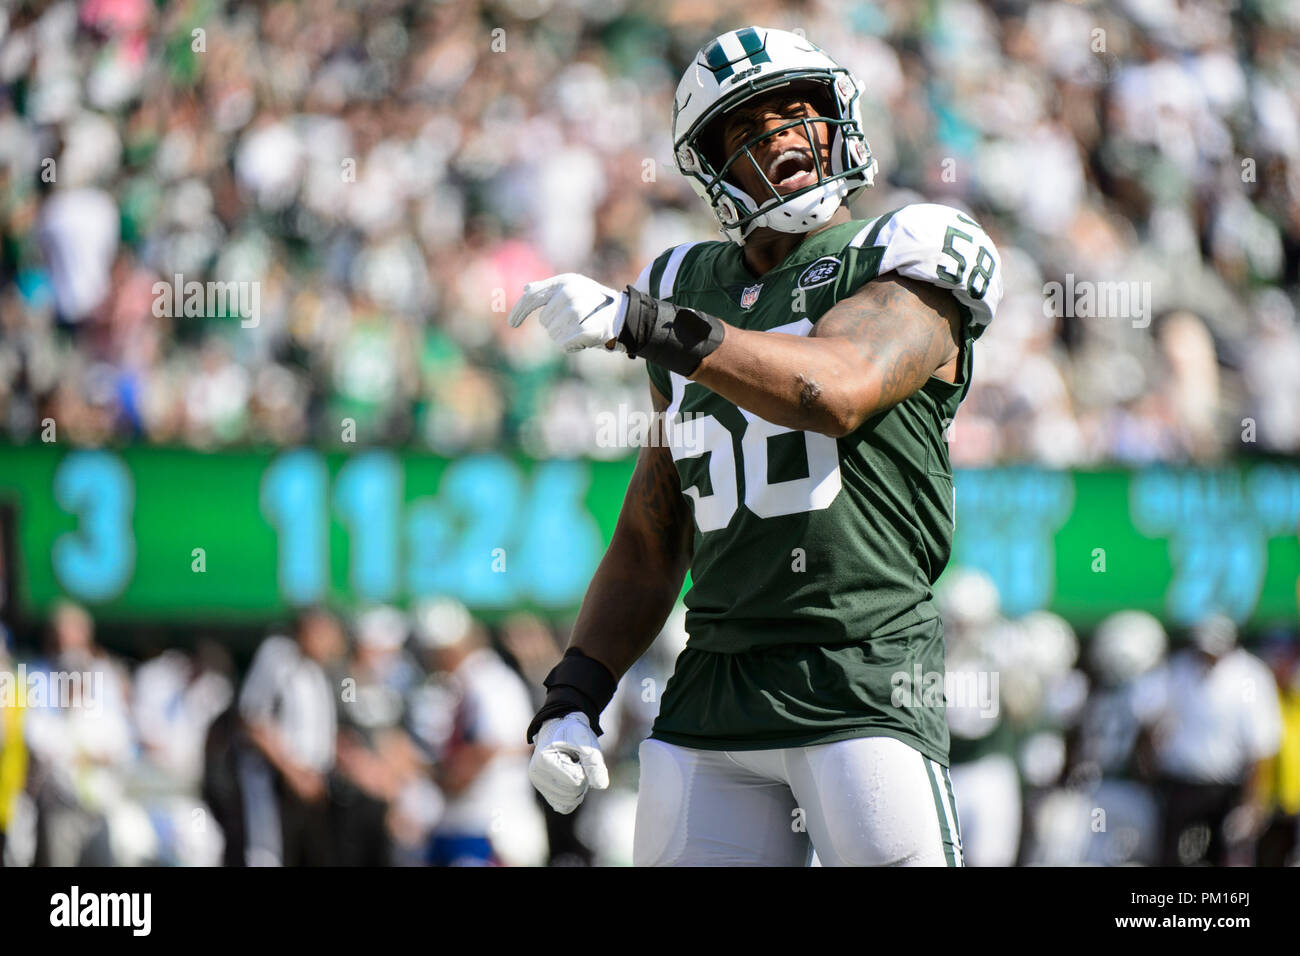 East Rutherford, NJ, USA. 16th Sep, 2018. New York Jets linebacker Darron Lee (58) reacts after a turnover in the second half during the game between The New York Jets and The Miami Dolphins at Met Life Stadium in East Rutherford, NJ. The Miami Dolphins defeat The New York Jets 20-12. Mandatory Credit: Kostas Lymperopoulos/CSM/Alamy Live News Stock Photo